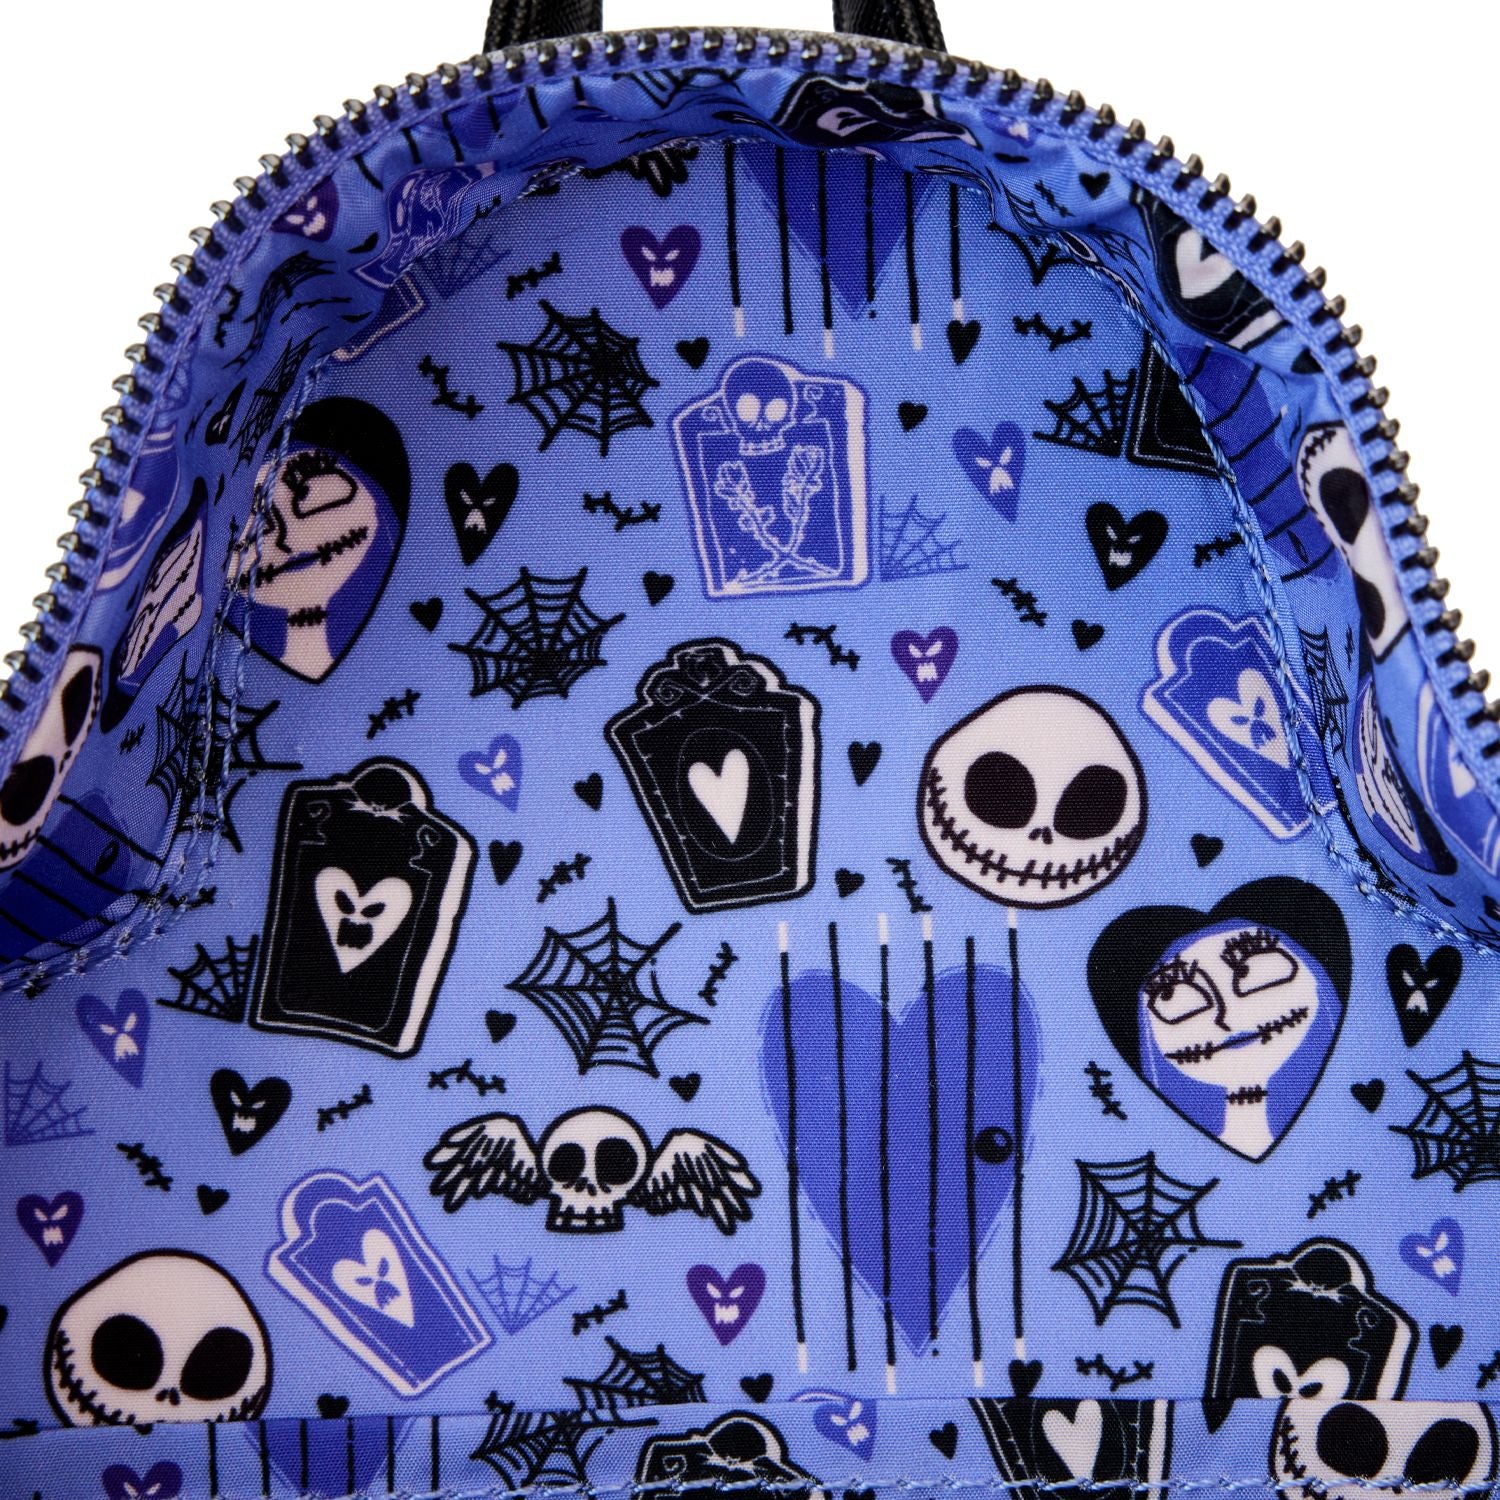 Lougefly DISNEY NBC JACK AND SALLY ETERNALLY YOURS MINI BACKPACK